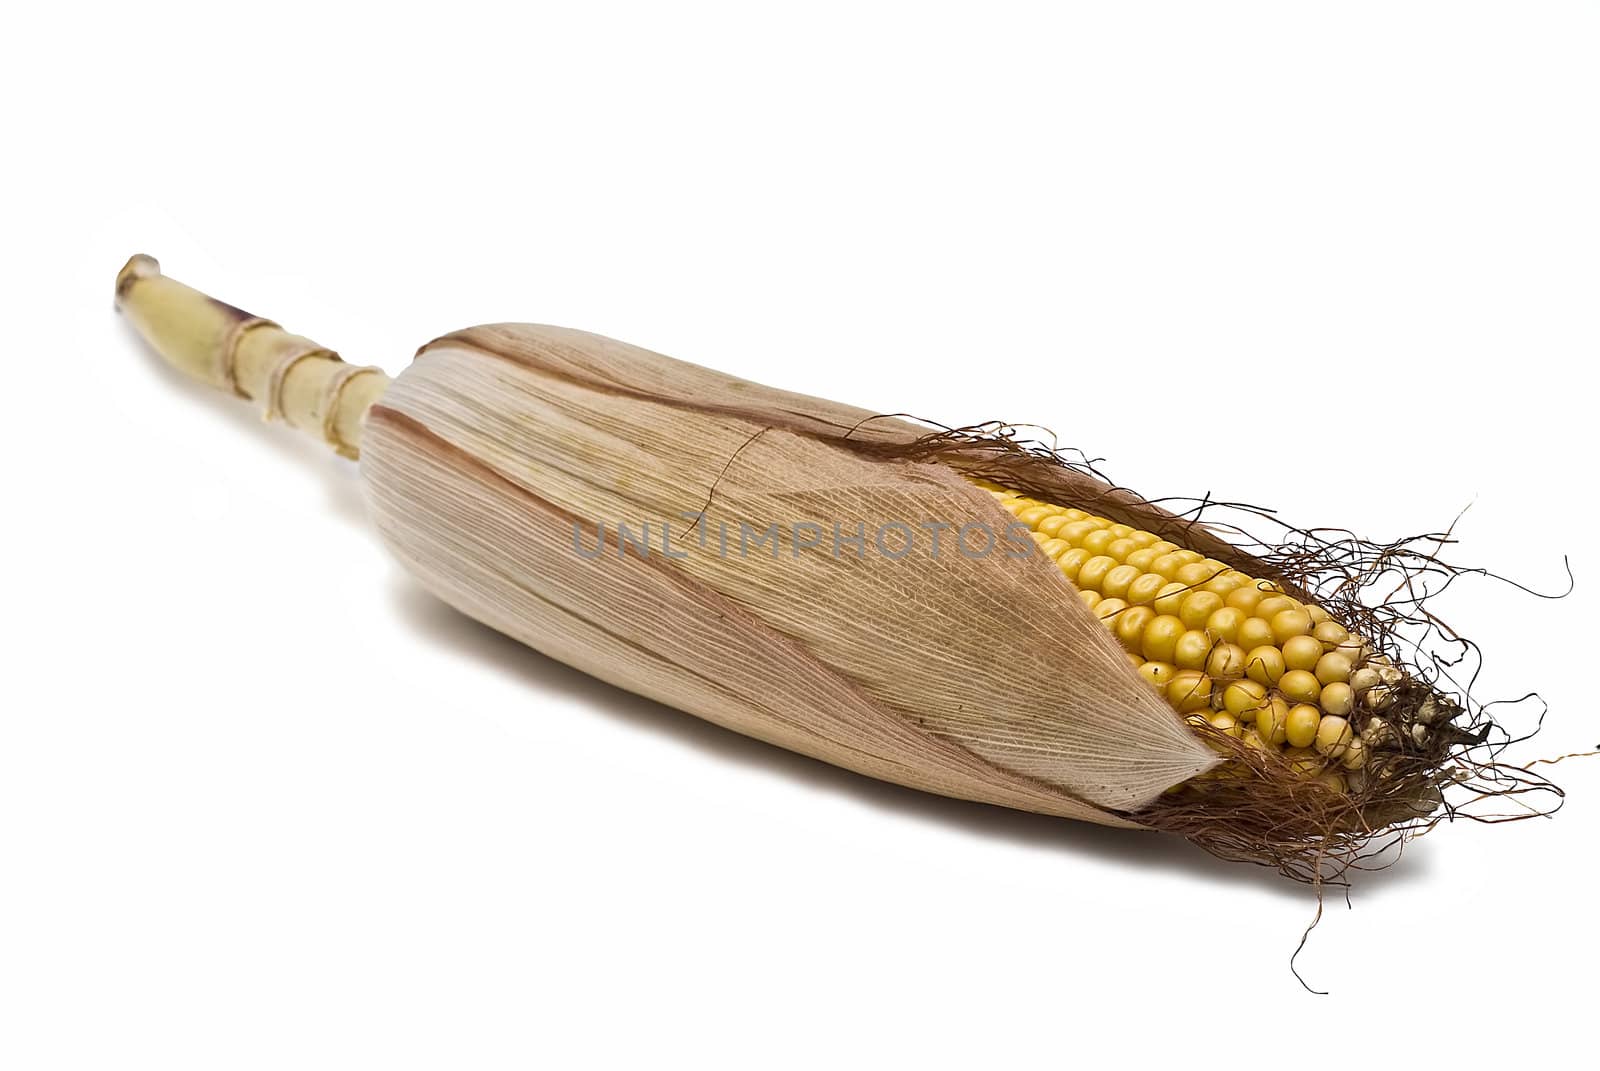 Dried corncobs with its skin isolated on a white background.